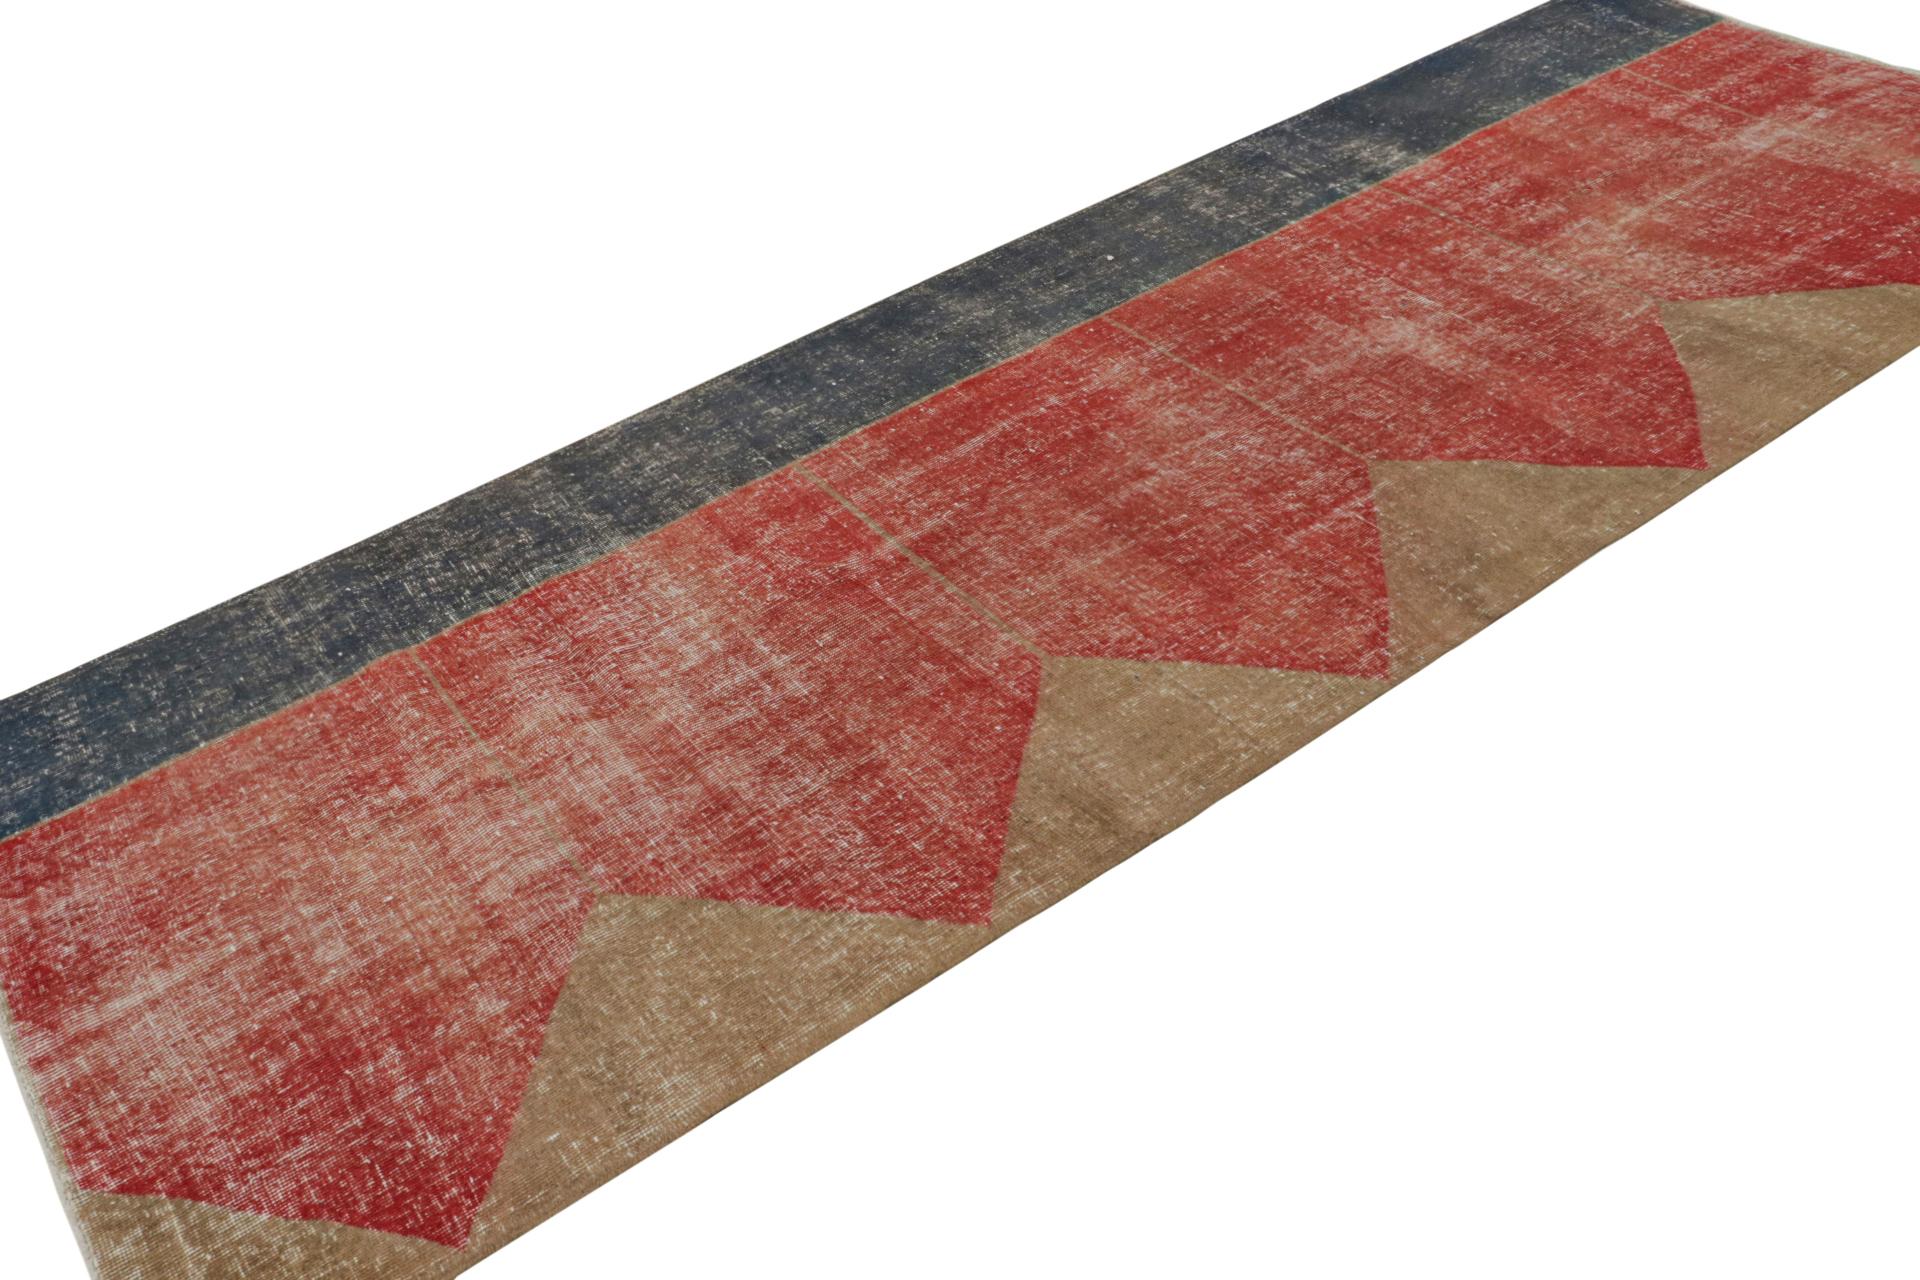 Hand Knotted in wool, this distressed vintage 4x11 Turkish rug, which is inspired by Saf rugs, a particular kind of prayer rug, features a brick red field and geometric patterns in hues of bronze and black.  

On the Design: 

Connoisseurs will